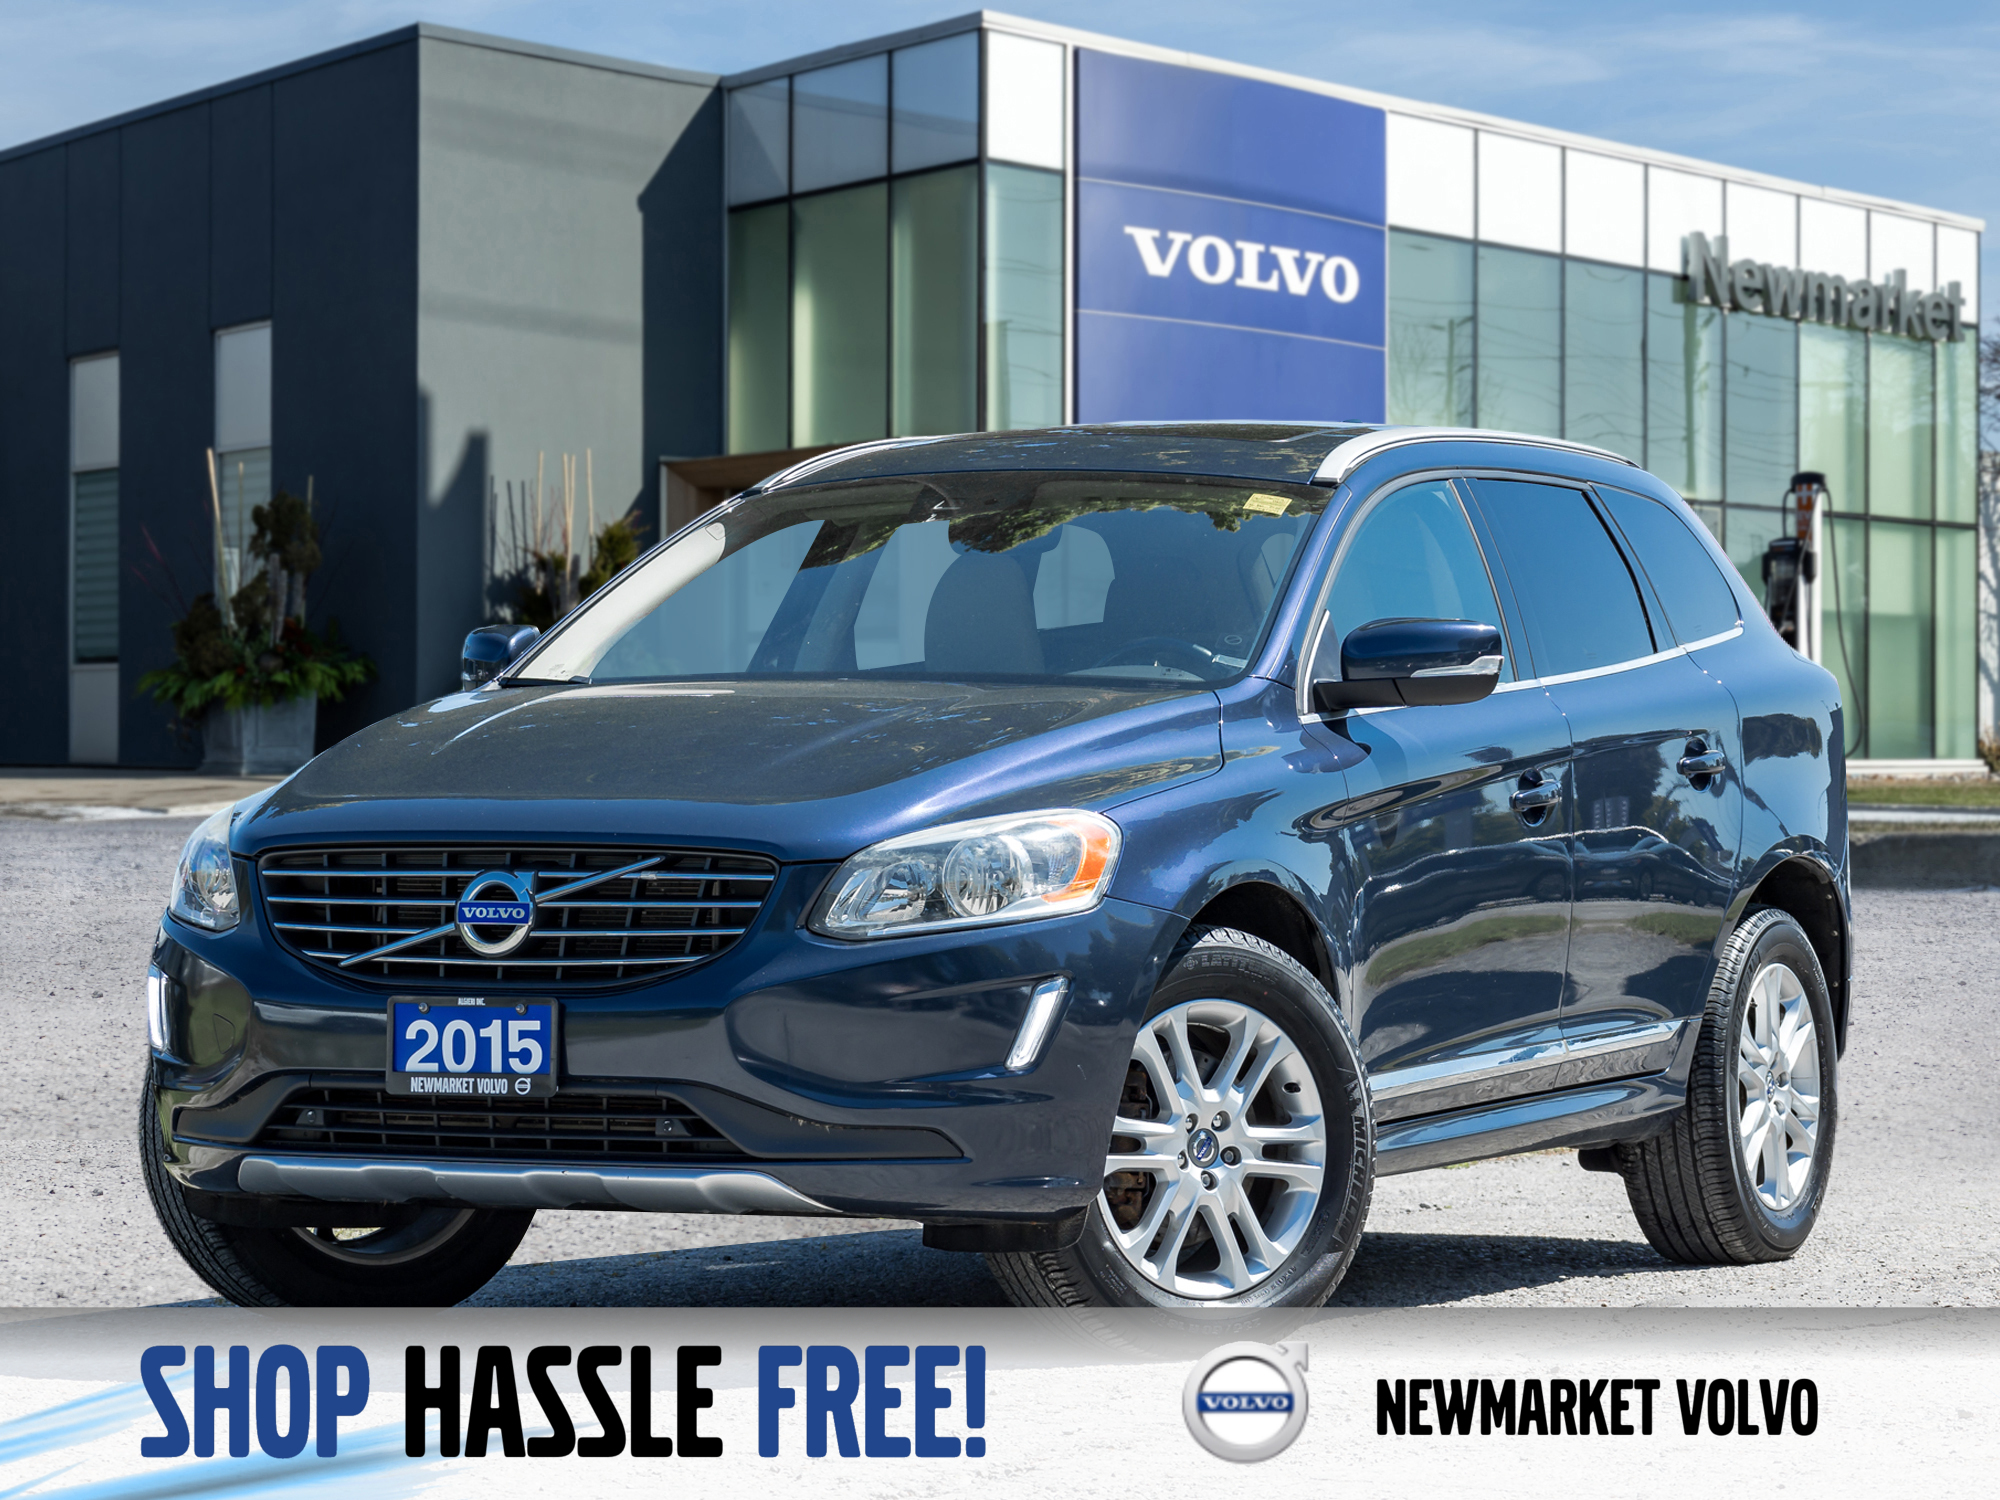 2015 Volvo XC60 2015.5 T5 Drive-E Premier SAFETY CERTIFIED